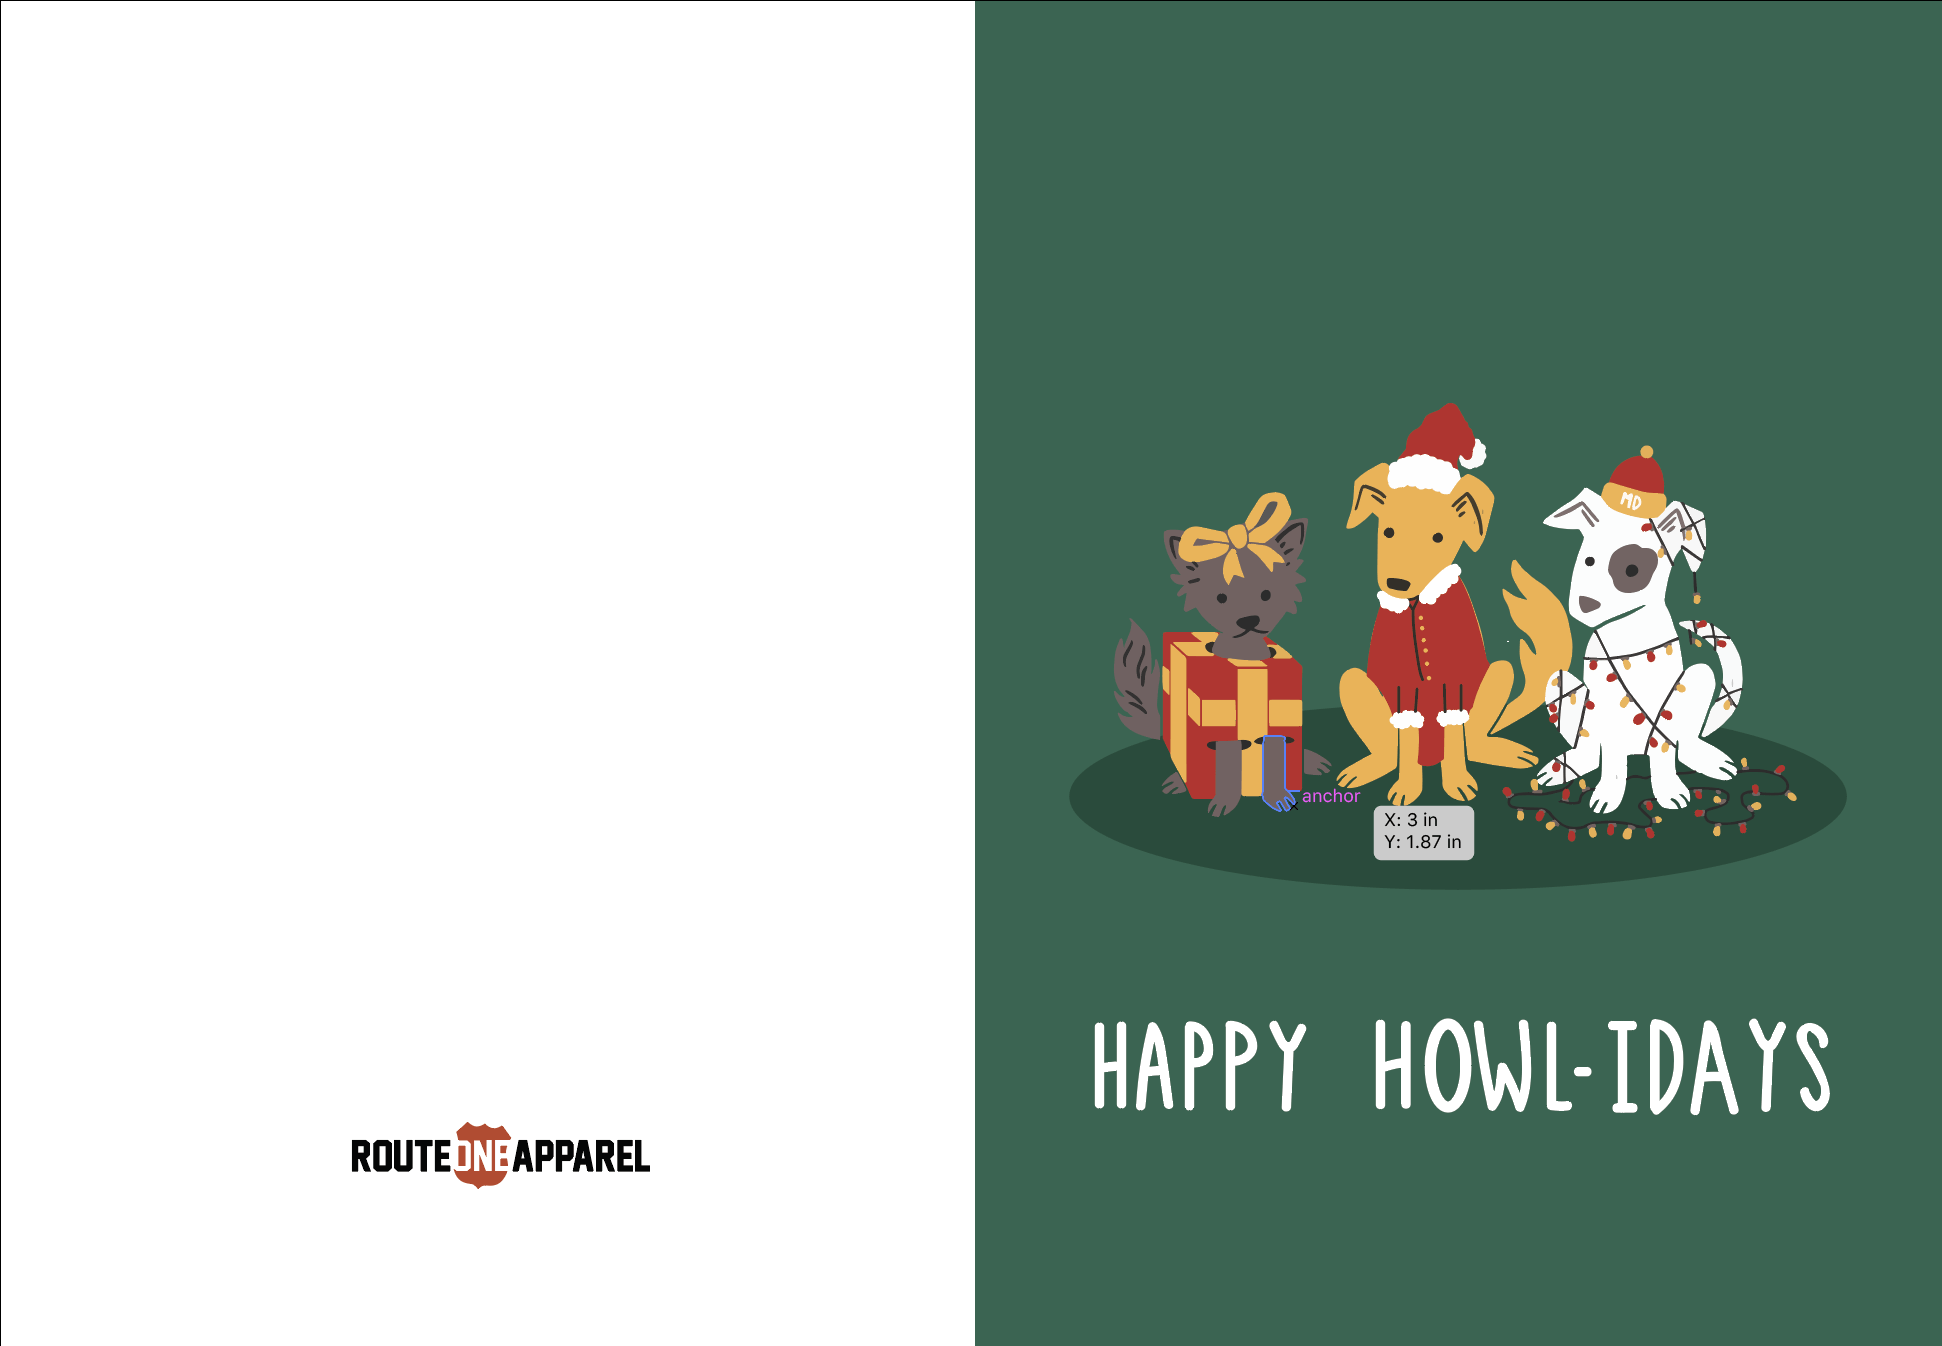 Happy Howli-days (Green) / Christmas Card - Route One Apparel